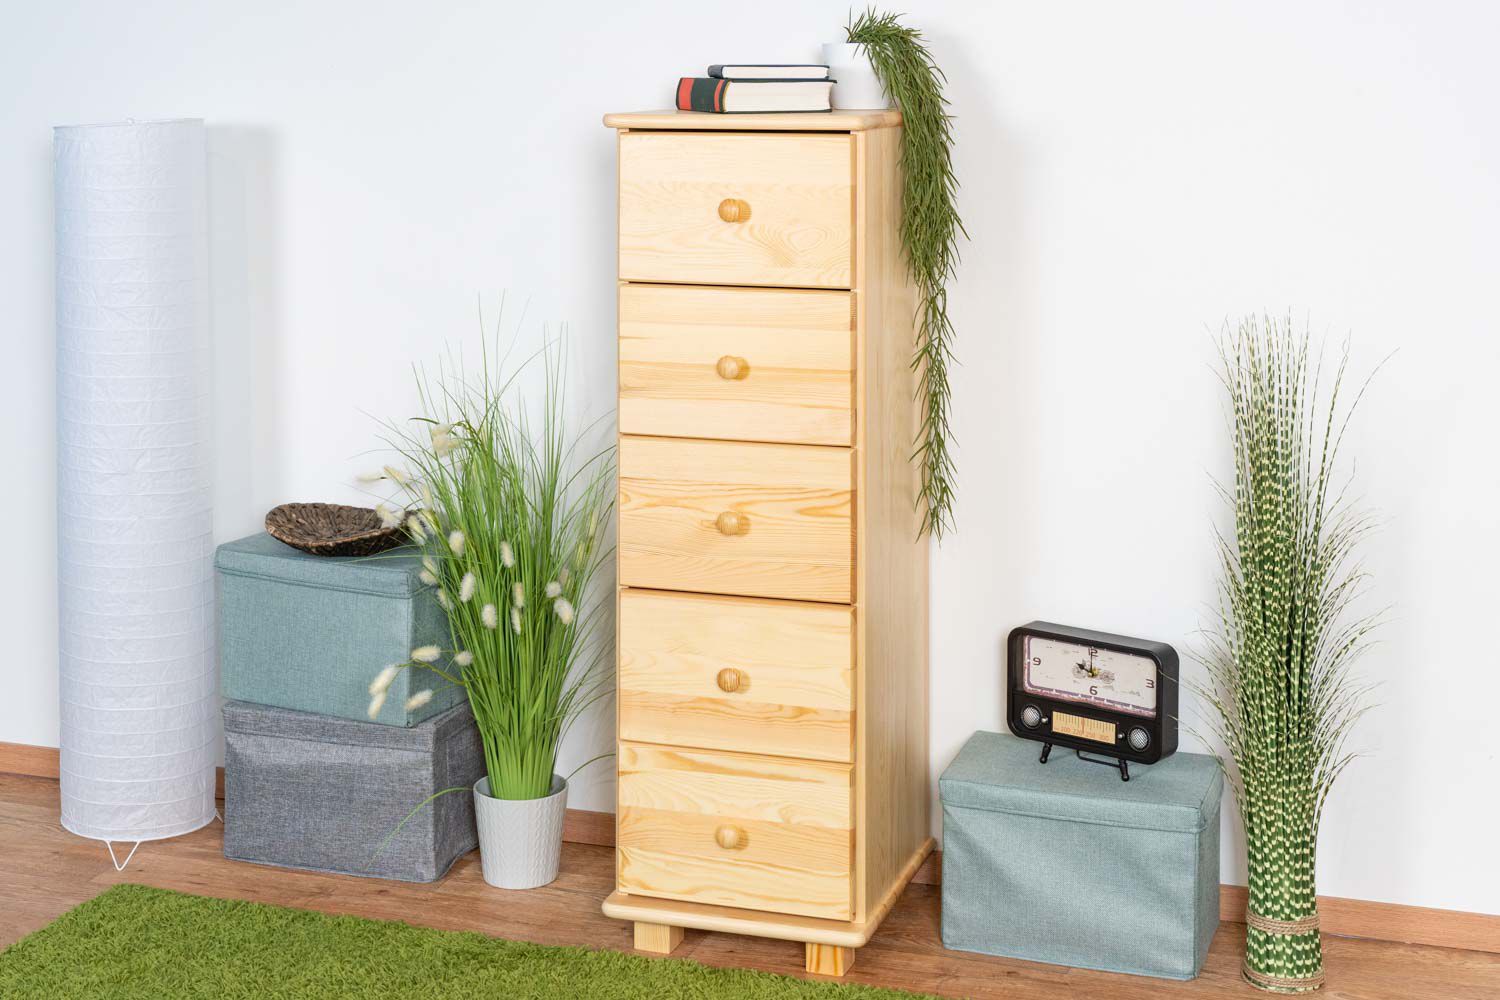 Chest of drawers solid pine solid wood natural 032 - Dimensions 122 x 40 x 42 cm (H x W x D)